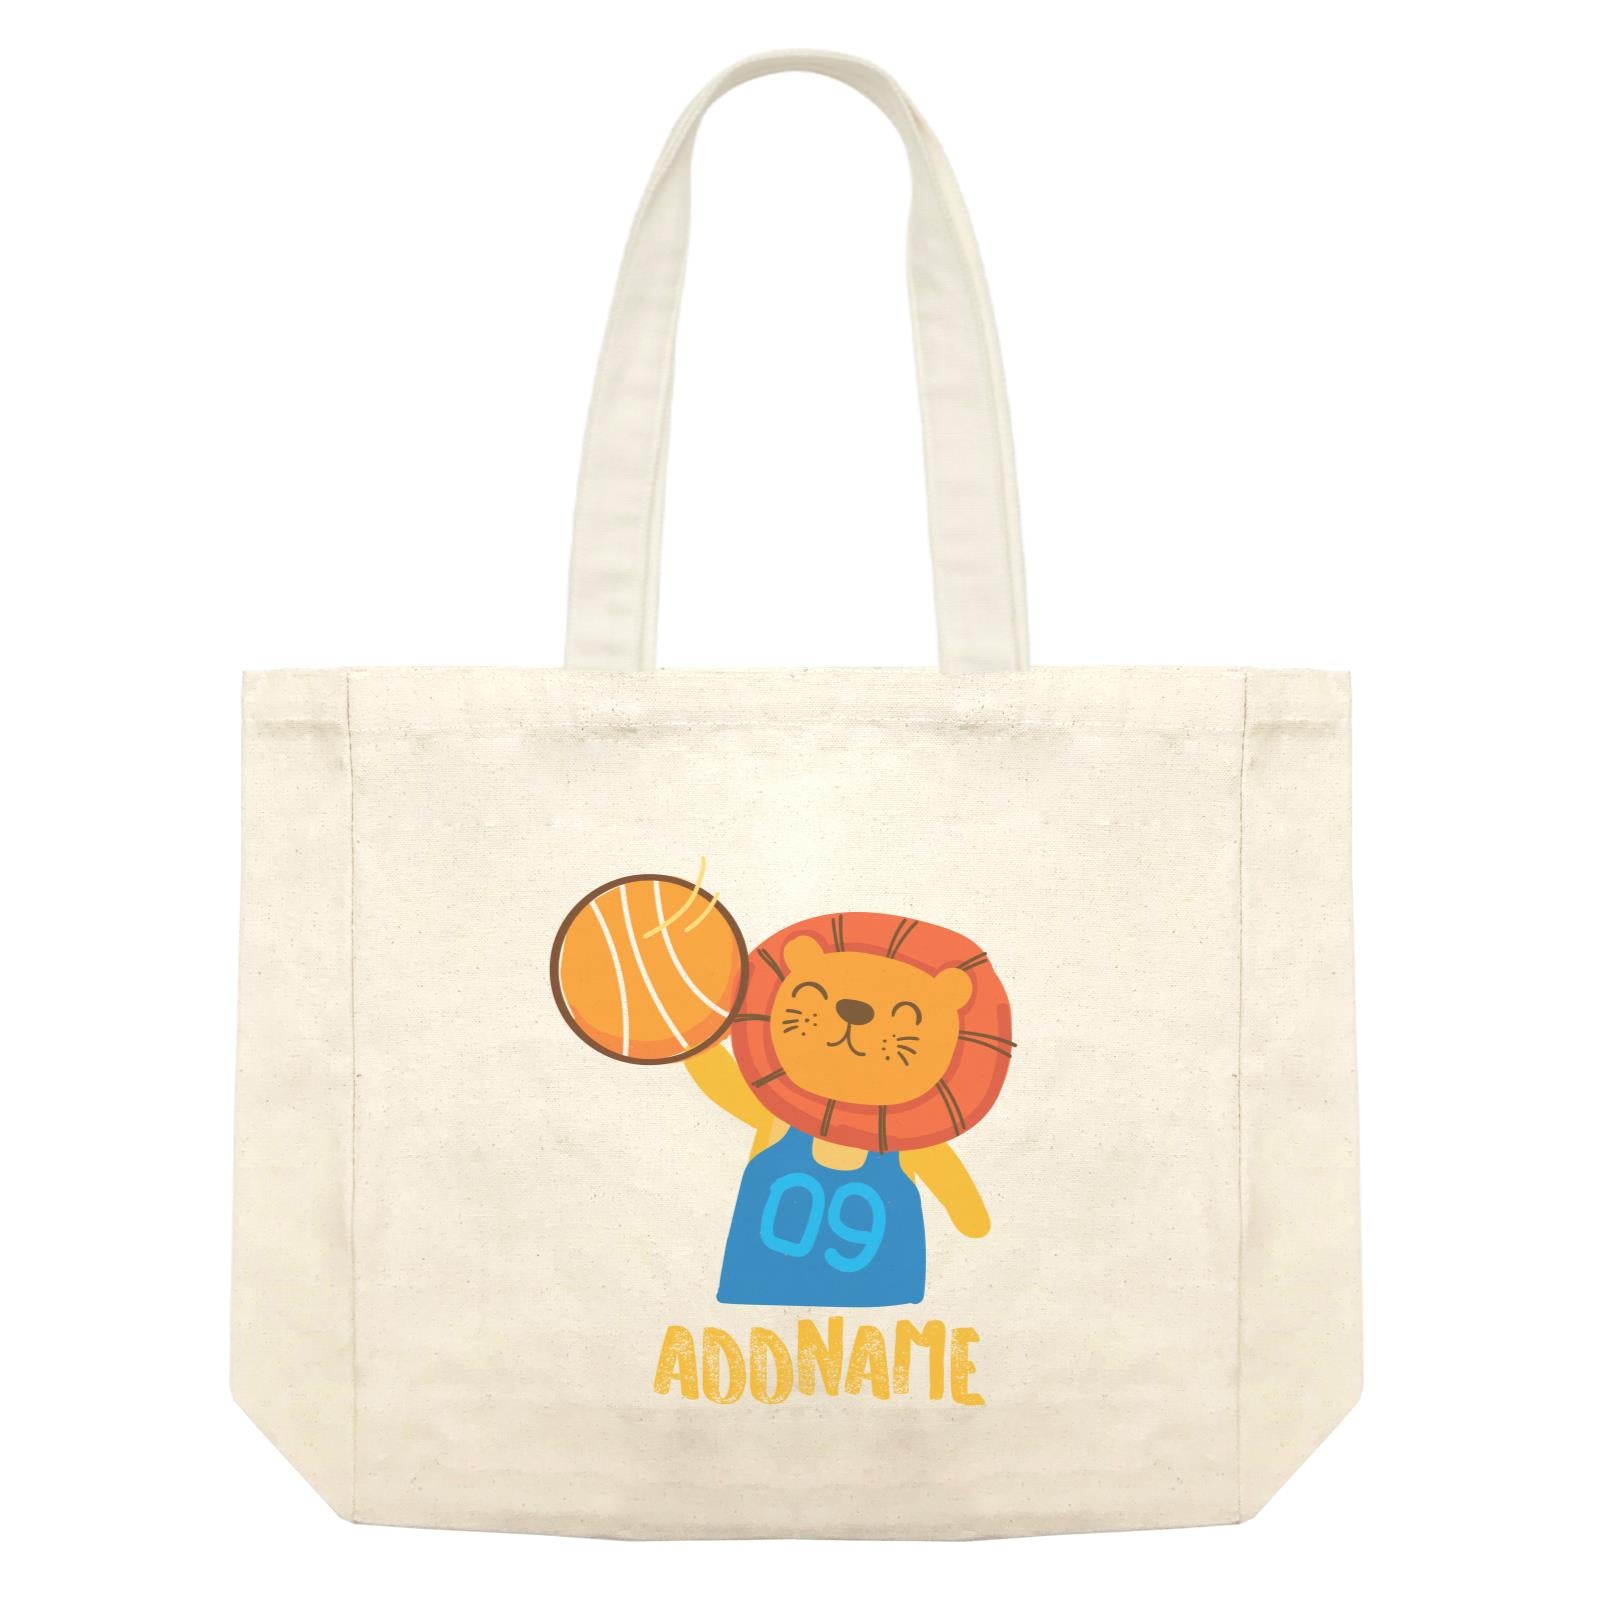 Cool Cute Animals Lion Basketball Player Addname Shopping Bag